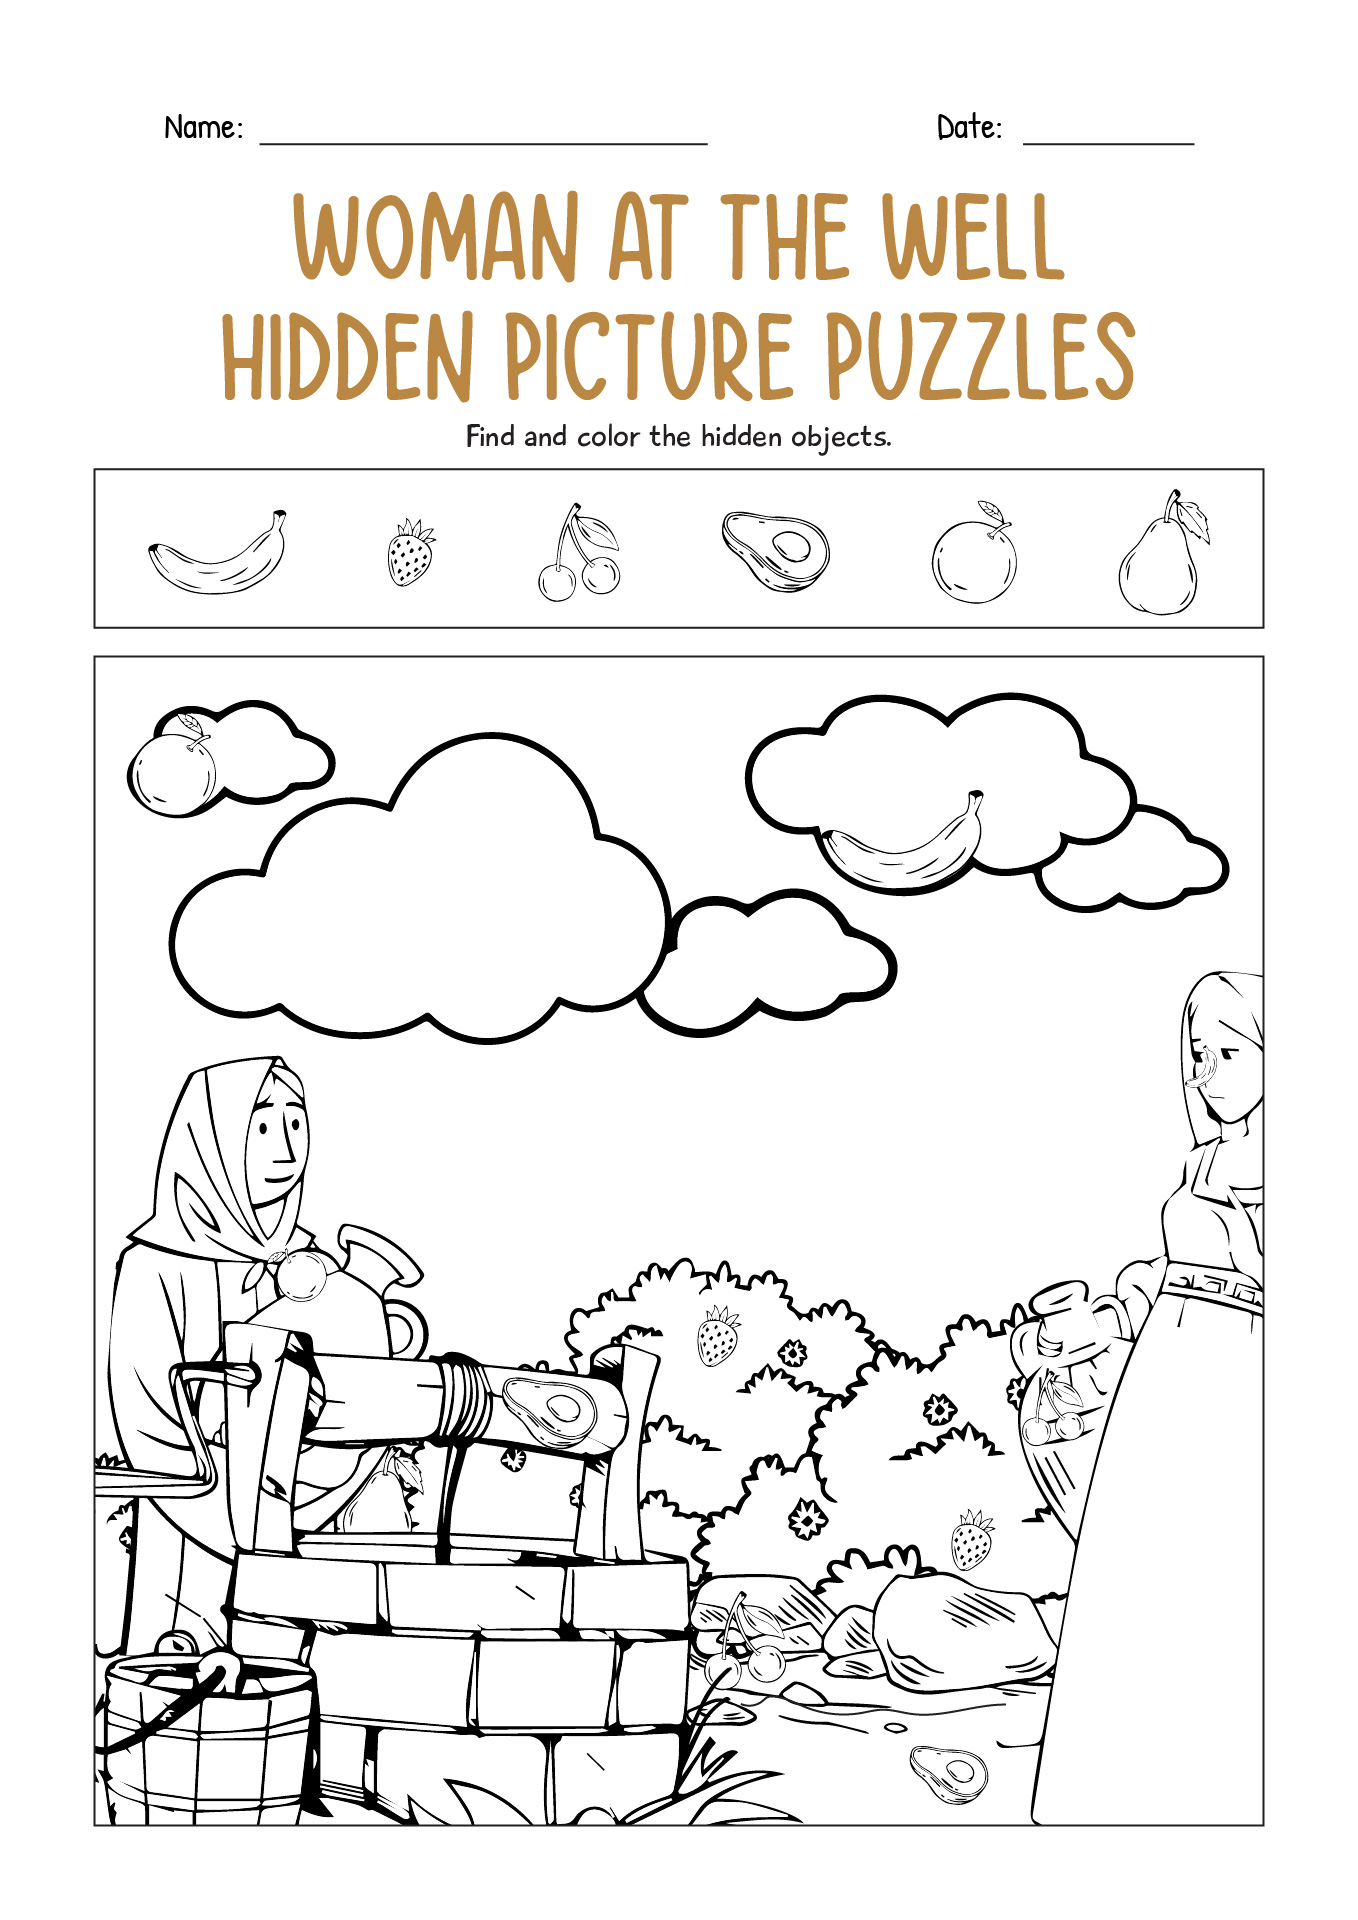 Woman at the Well Hidden Picture Puzzles Printable